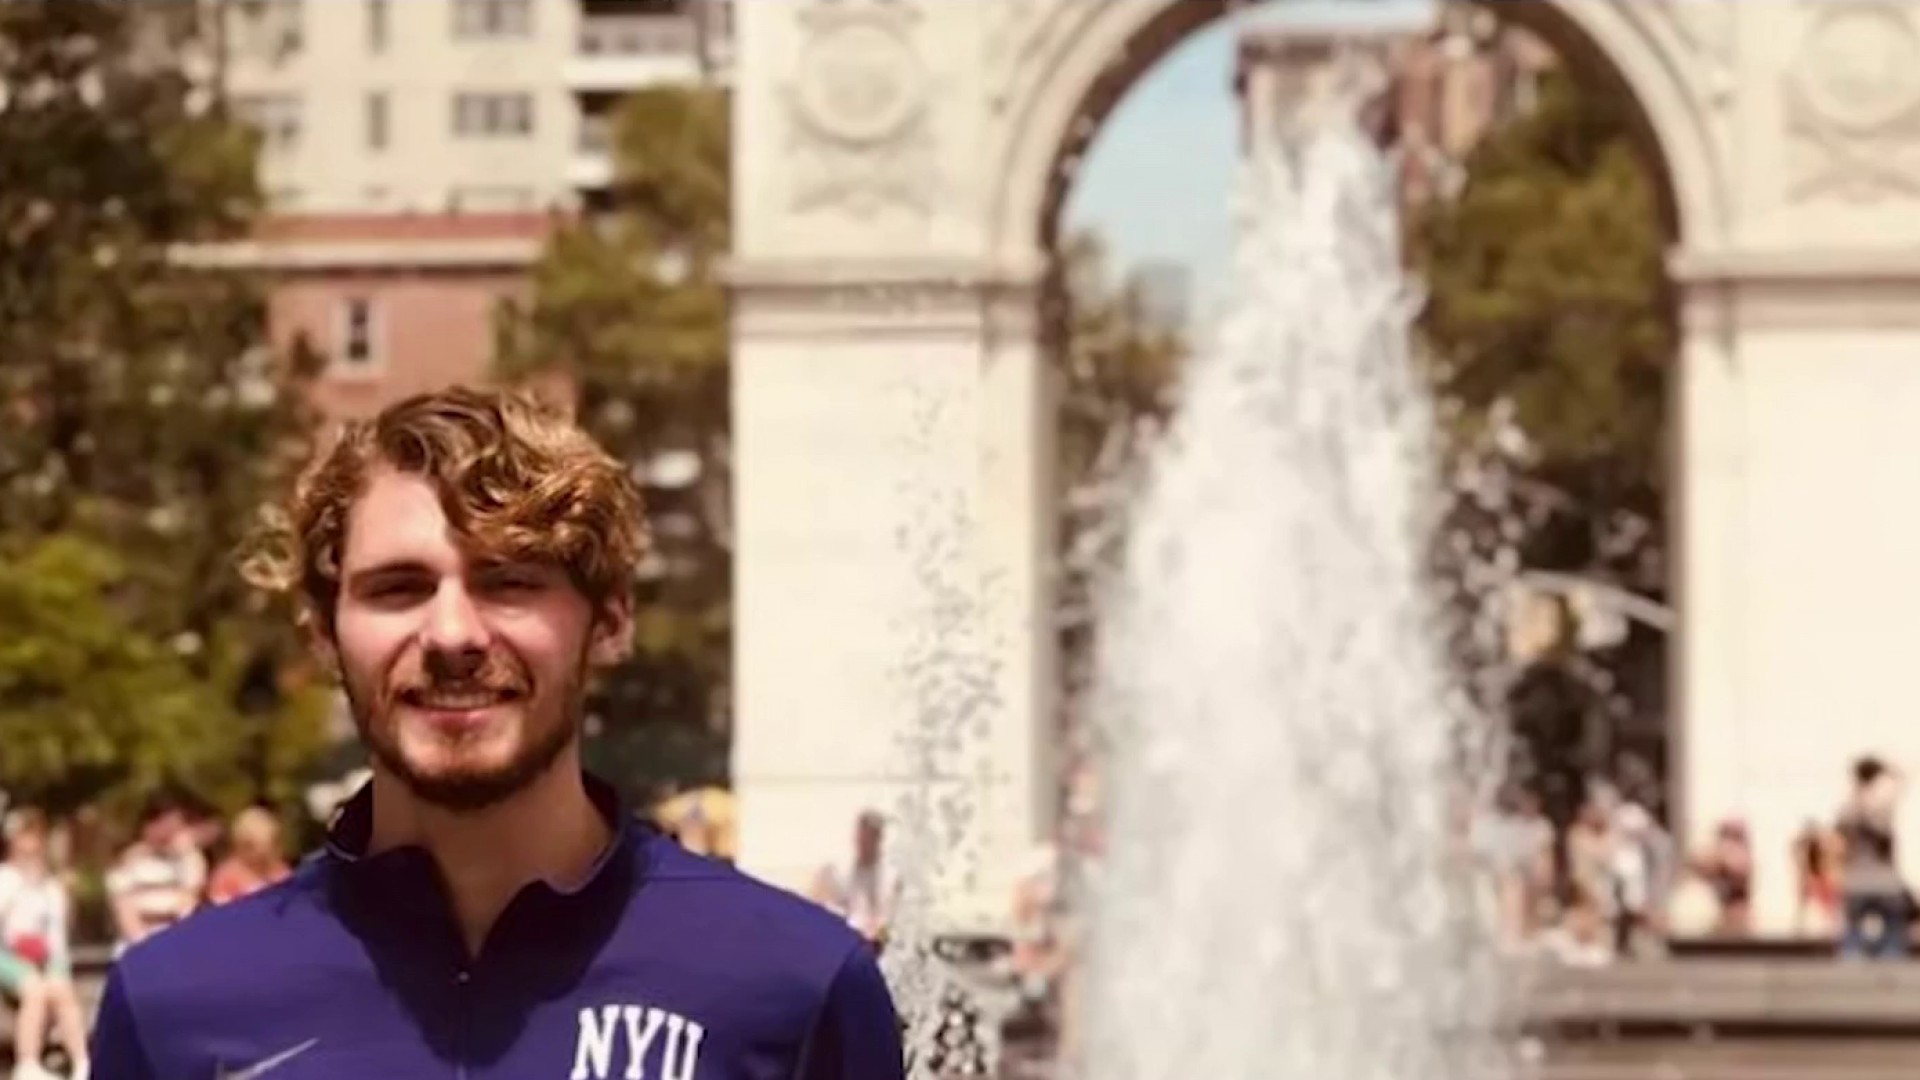 NYU Student Hit and Killed by Alleged Drunk Driver